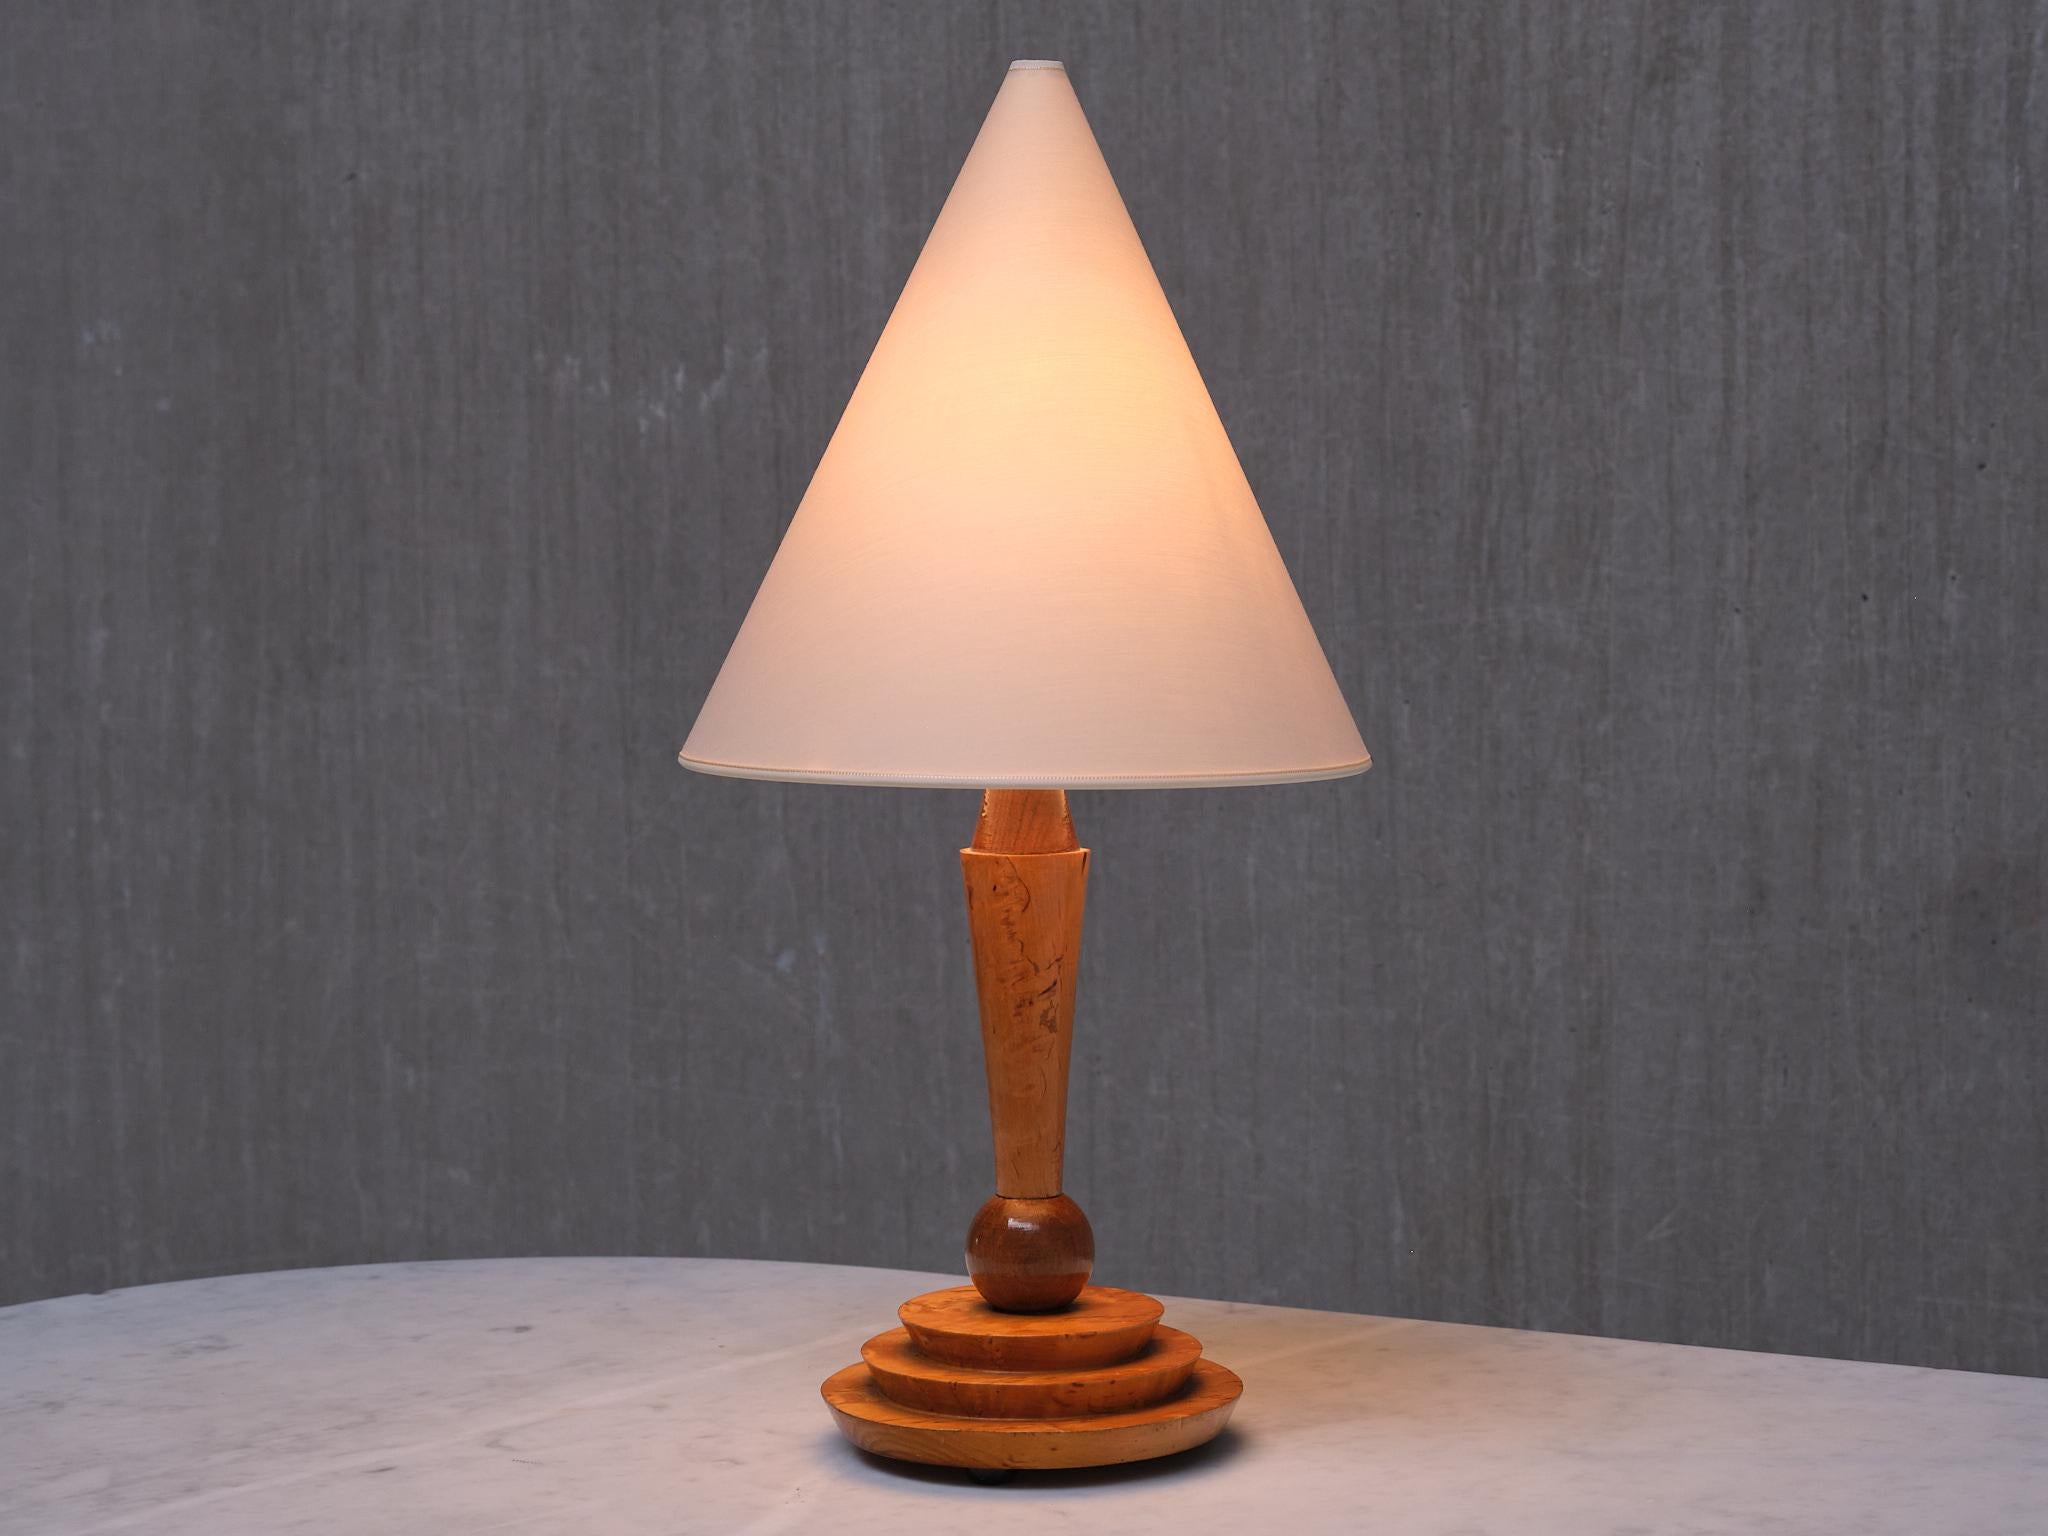 Art Deco Table Lamp in Birdseye Maple with Ivory Colored Shade, Austria, 1930s For Sale 4